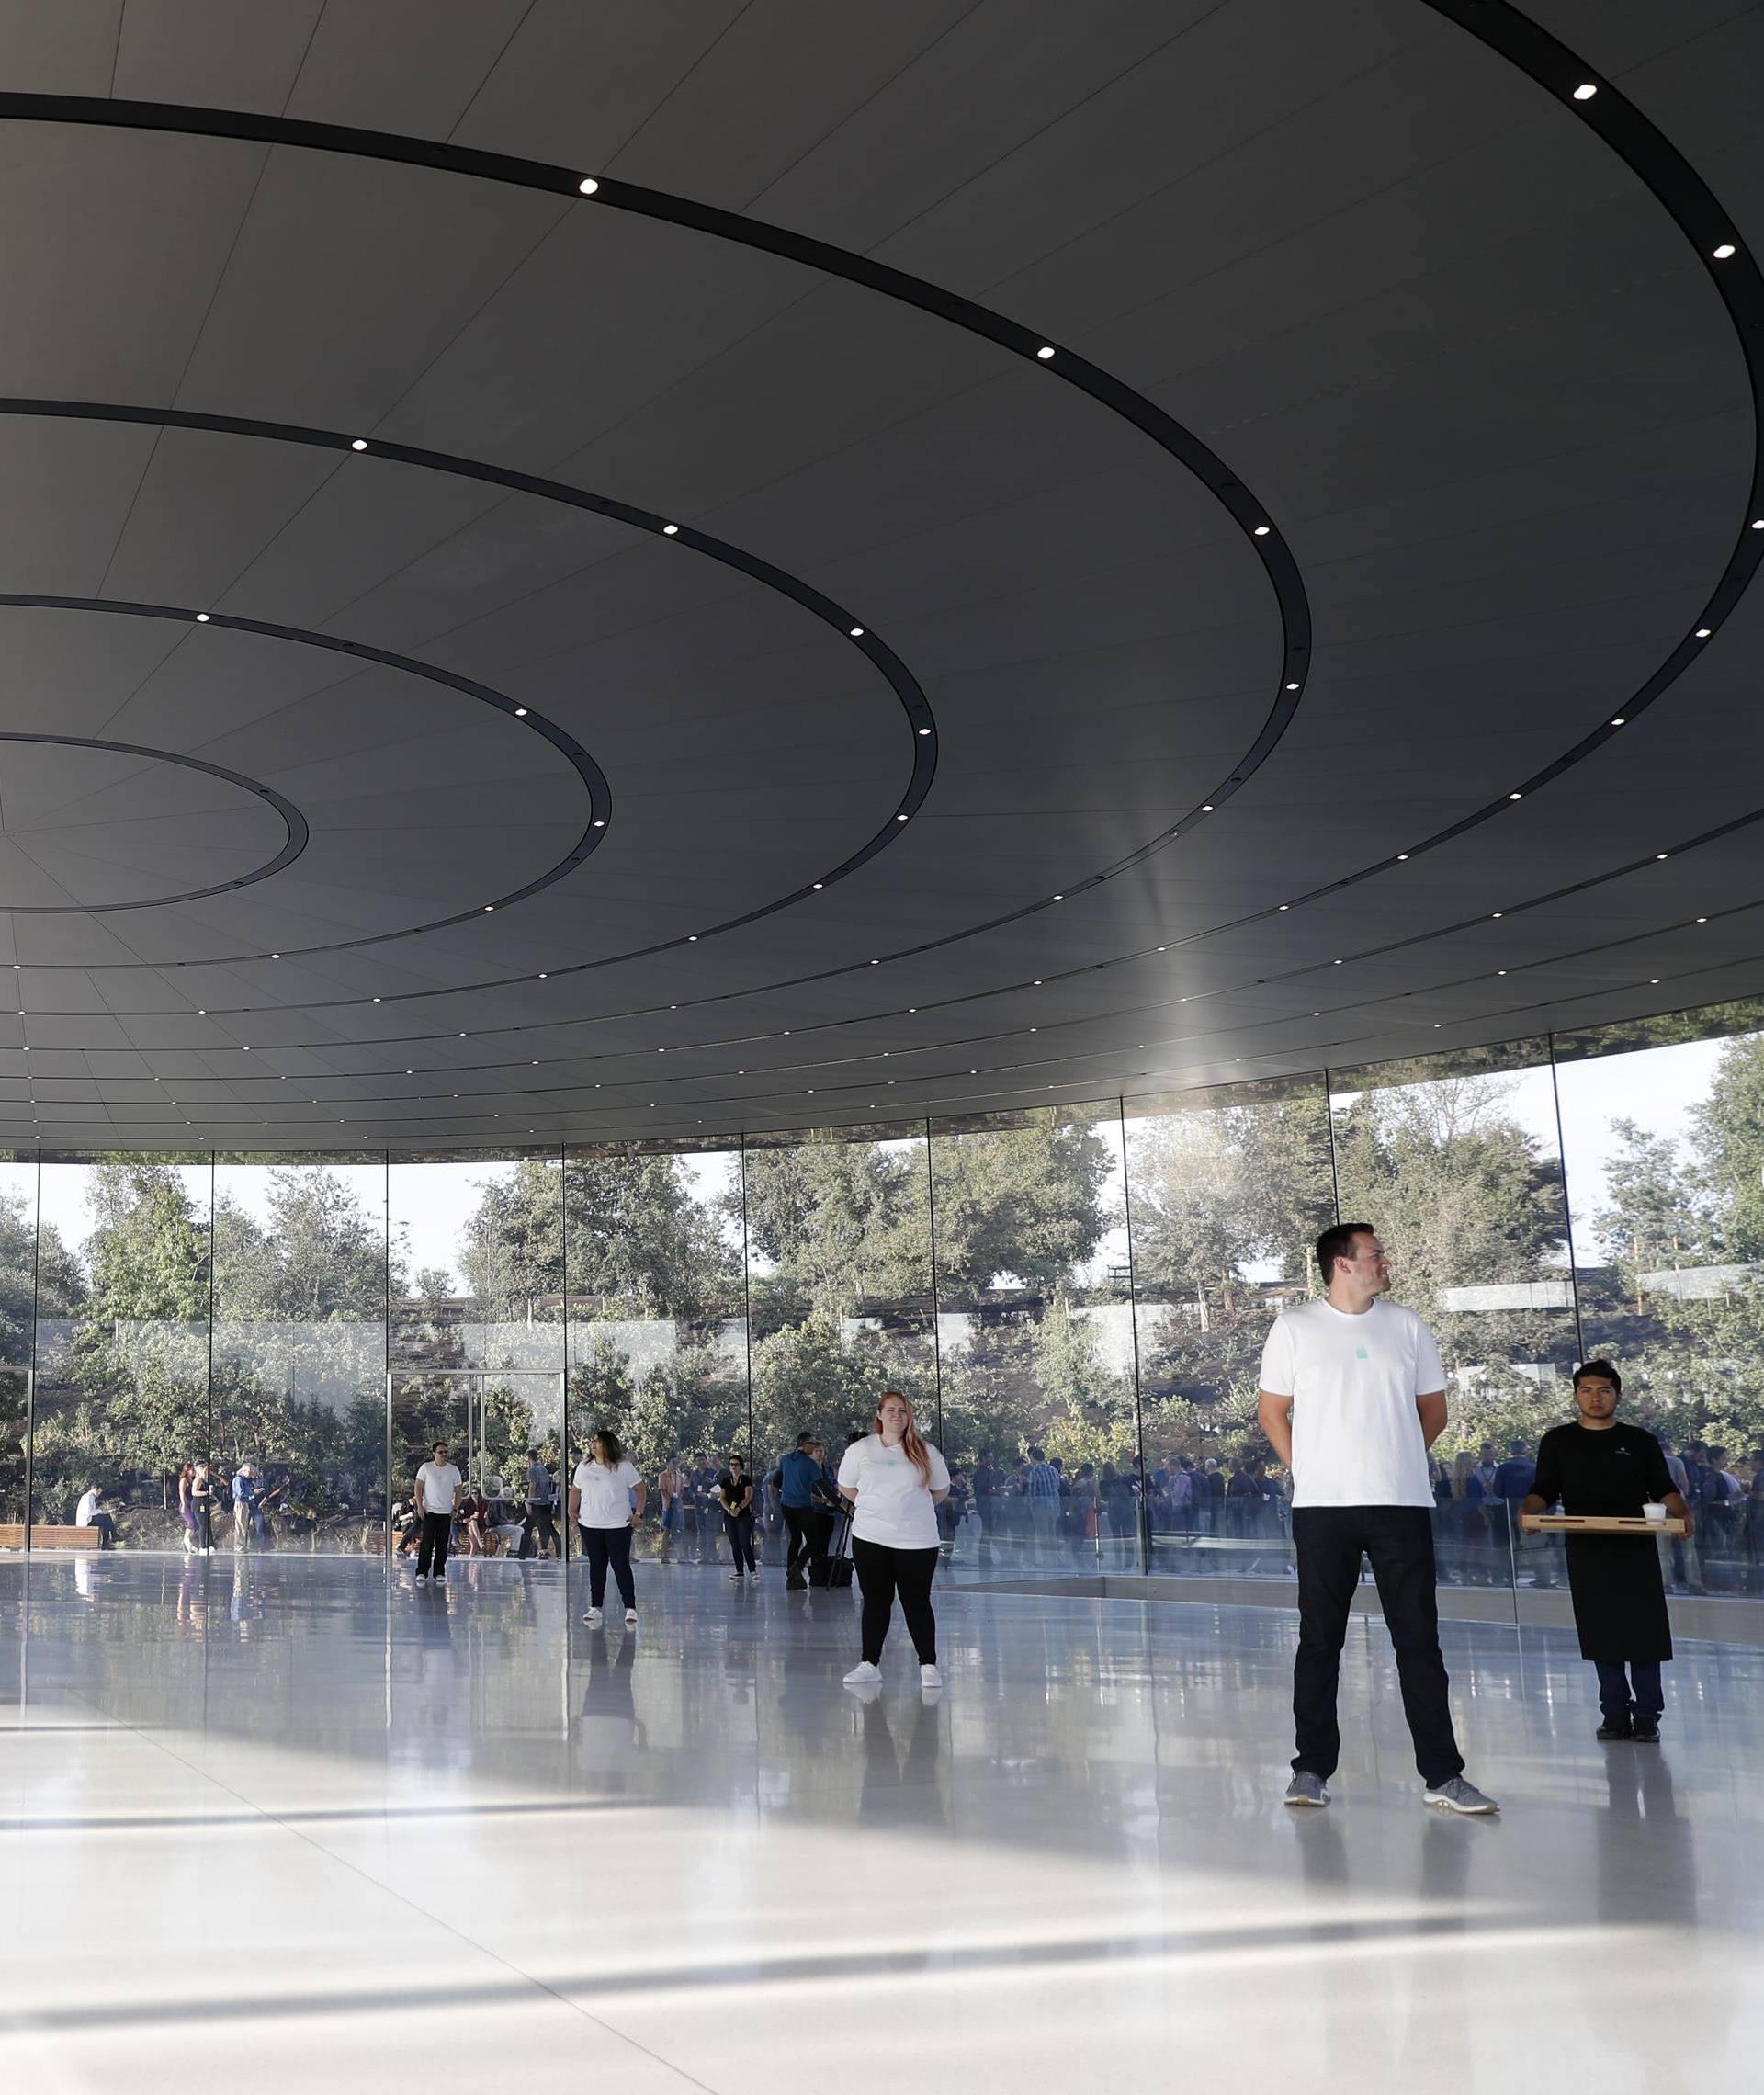 People await the start of a product launch event at Apple's new campus in Cupertino